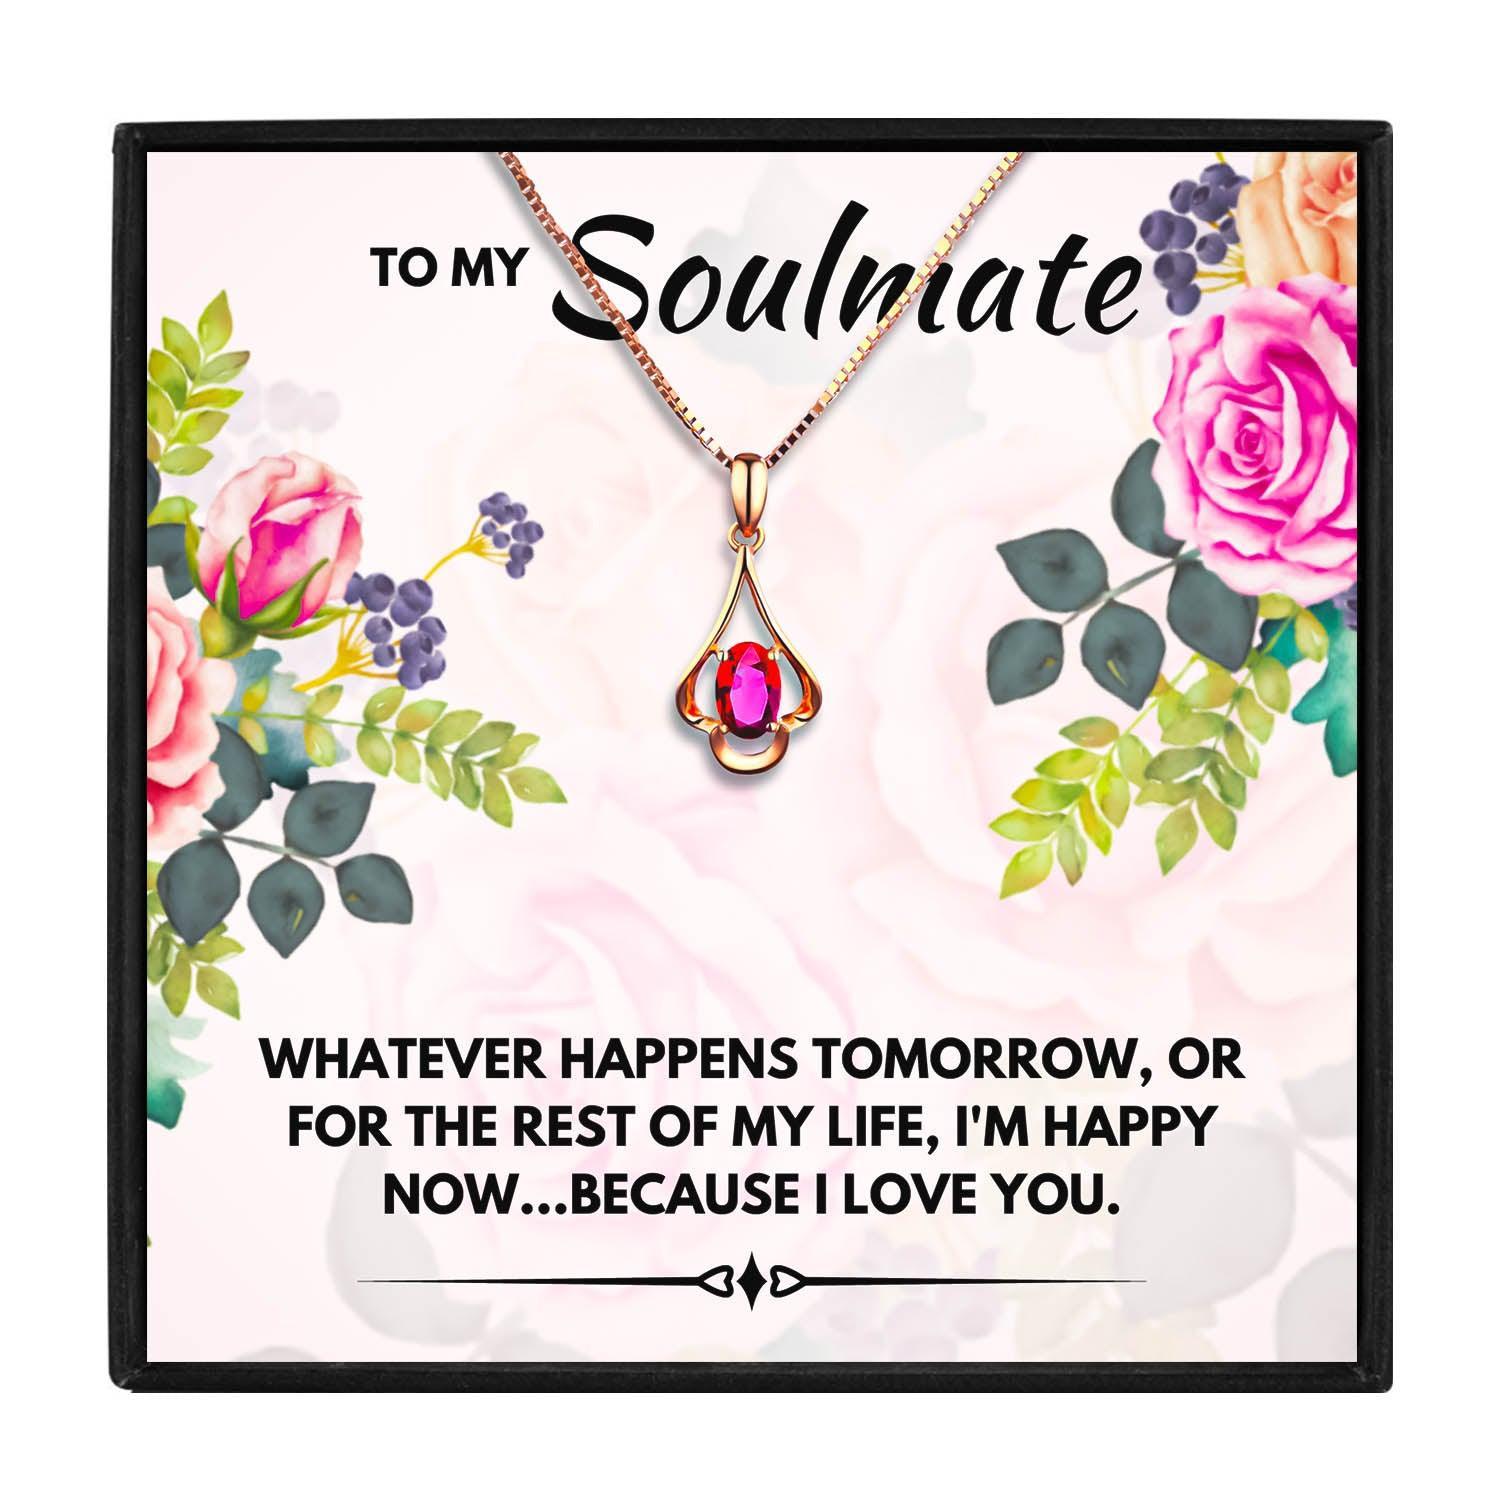 Soulmate Gift Necklace For Her for Christmas 2023 | Soulmate Gift Necklace For Her - undefined | Meaningful Soulmate gift, soulmate gift ideas, soulmate necklace, to my soulmate necklace | From Hunny Life | hunnylife.com